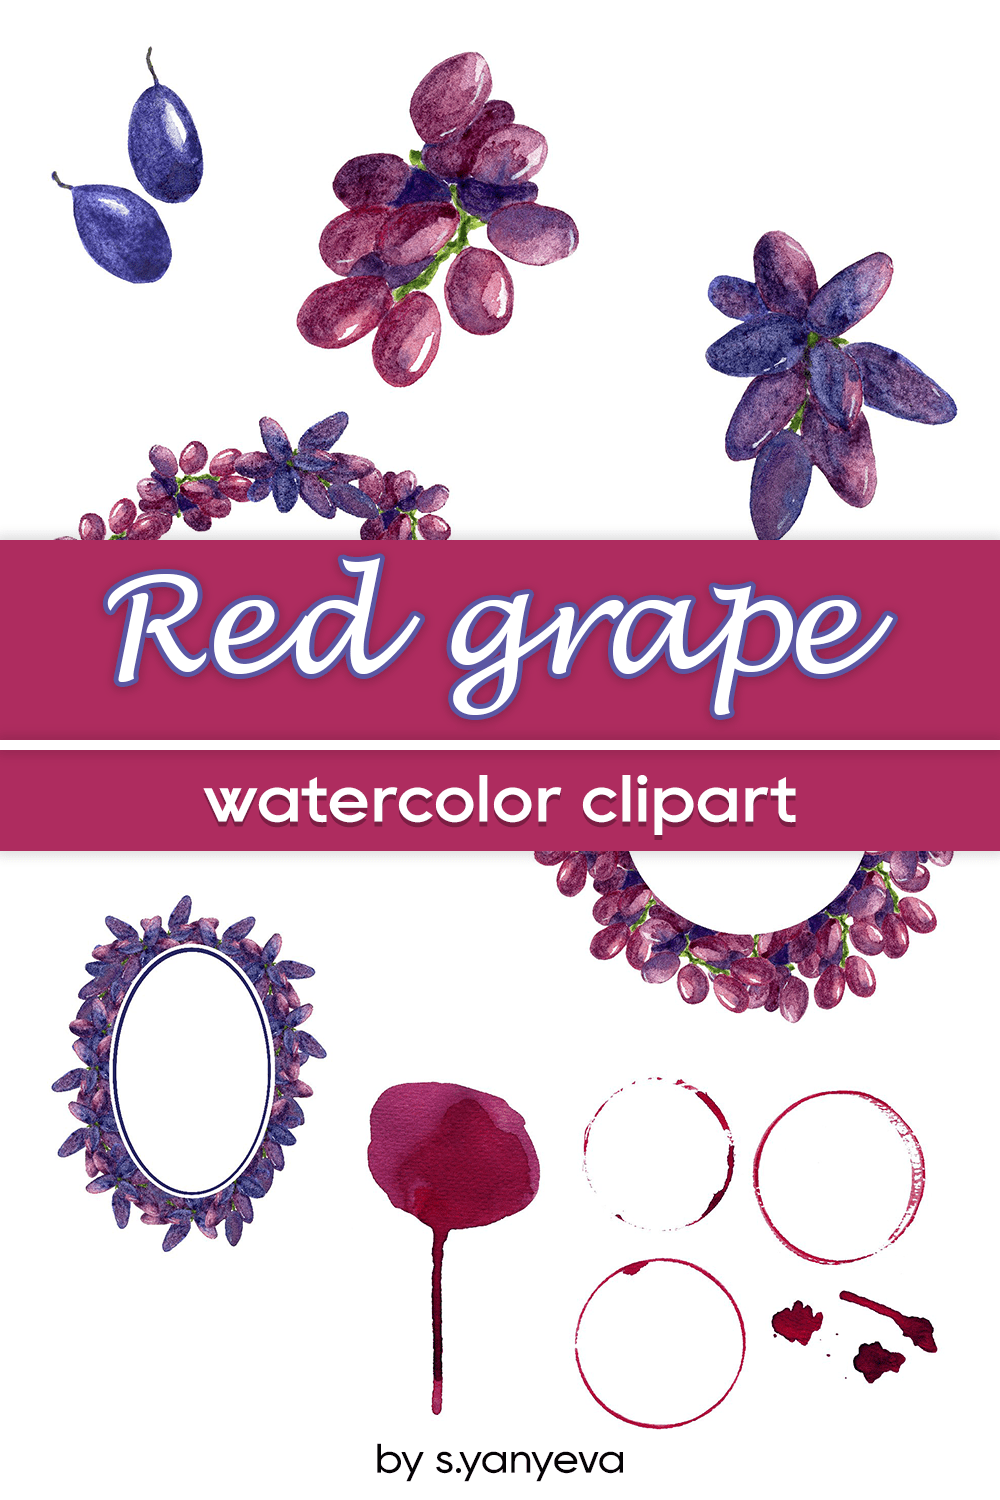 Red grape watercolor clipart - pinterest image preview.